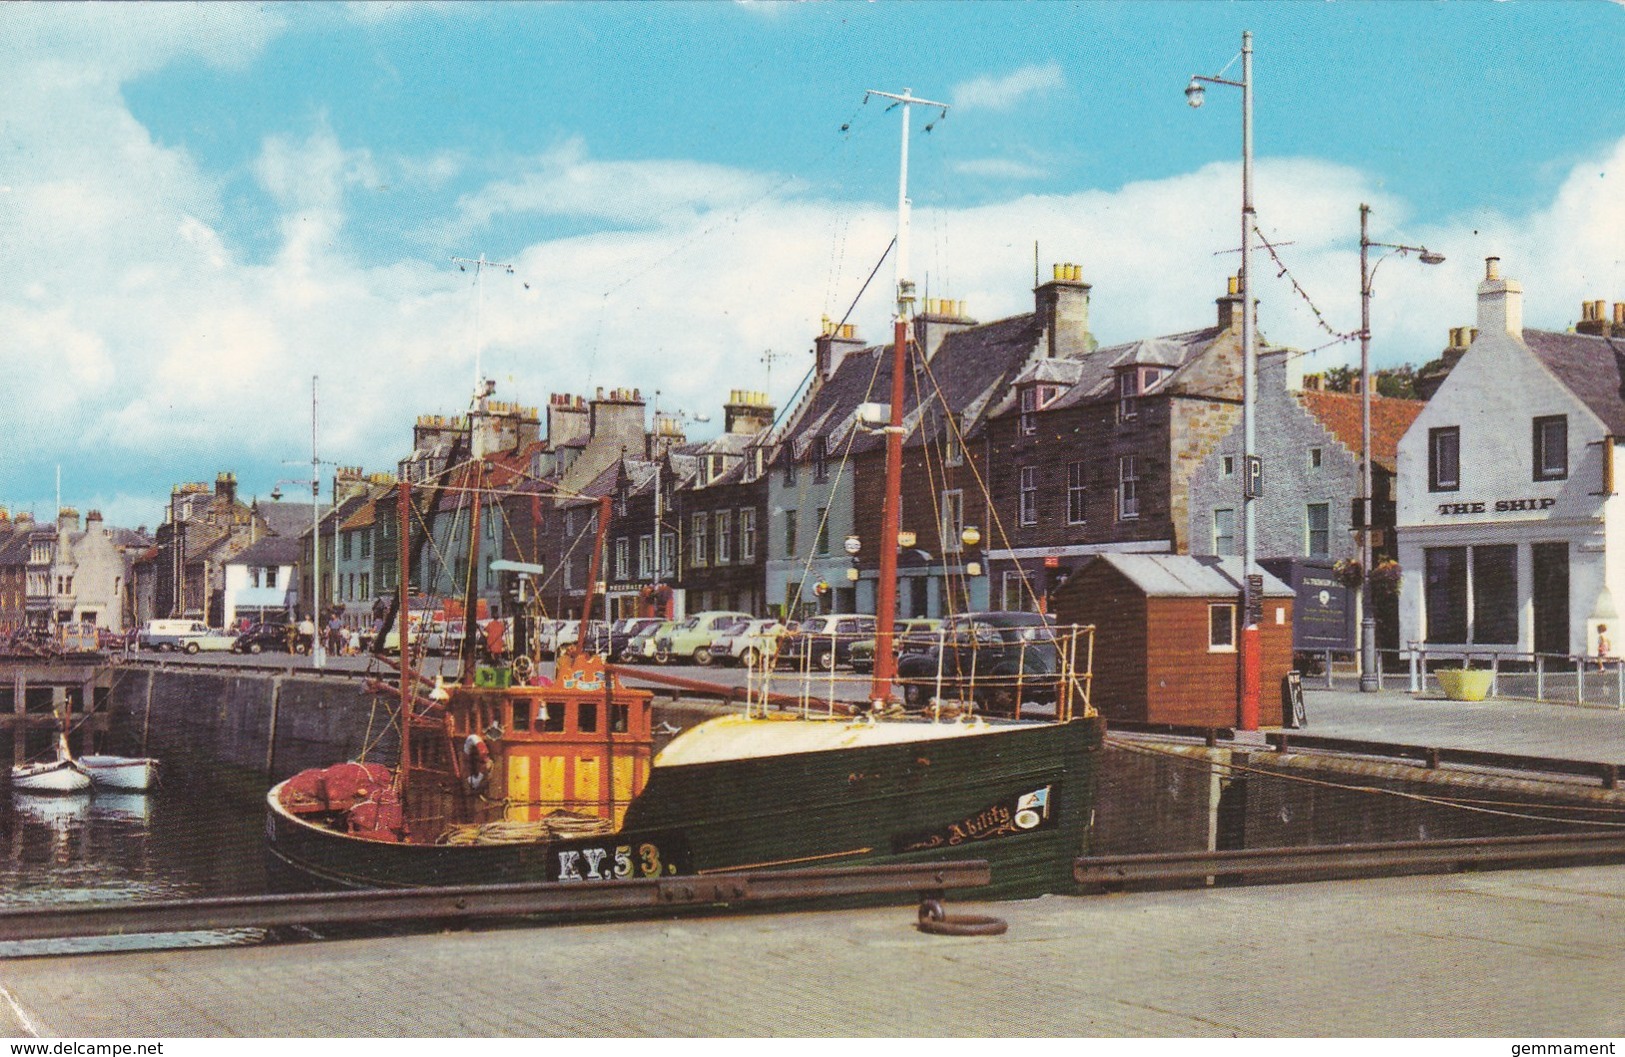 ANSTRUTHER - SHORE STREET FROM THE MIDDLE PIER - Fife